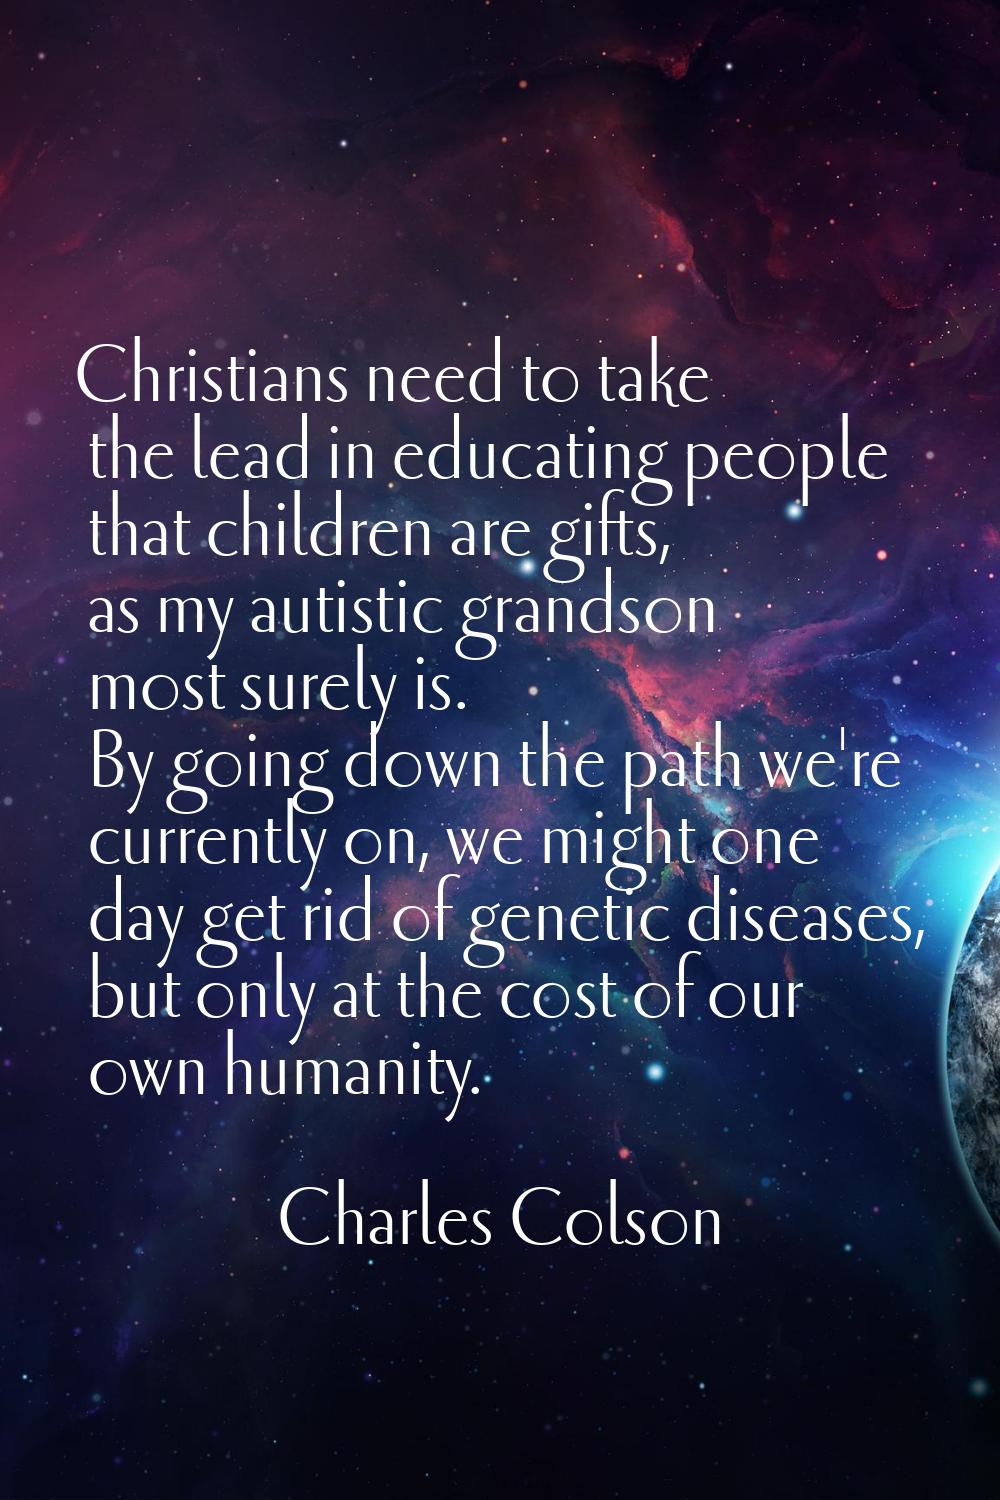 Christians need to take the lead in educating people that children are gifts, as my autistic grands